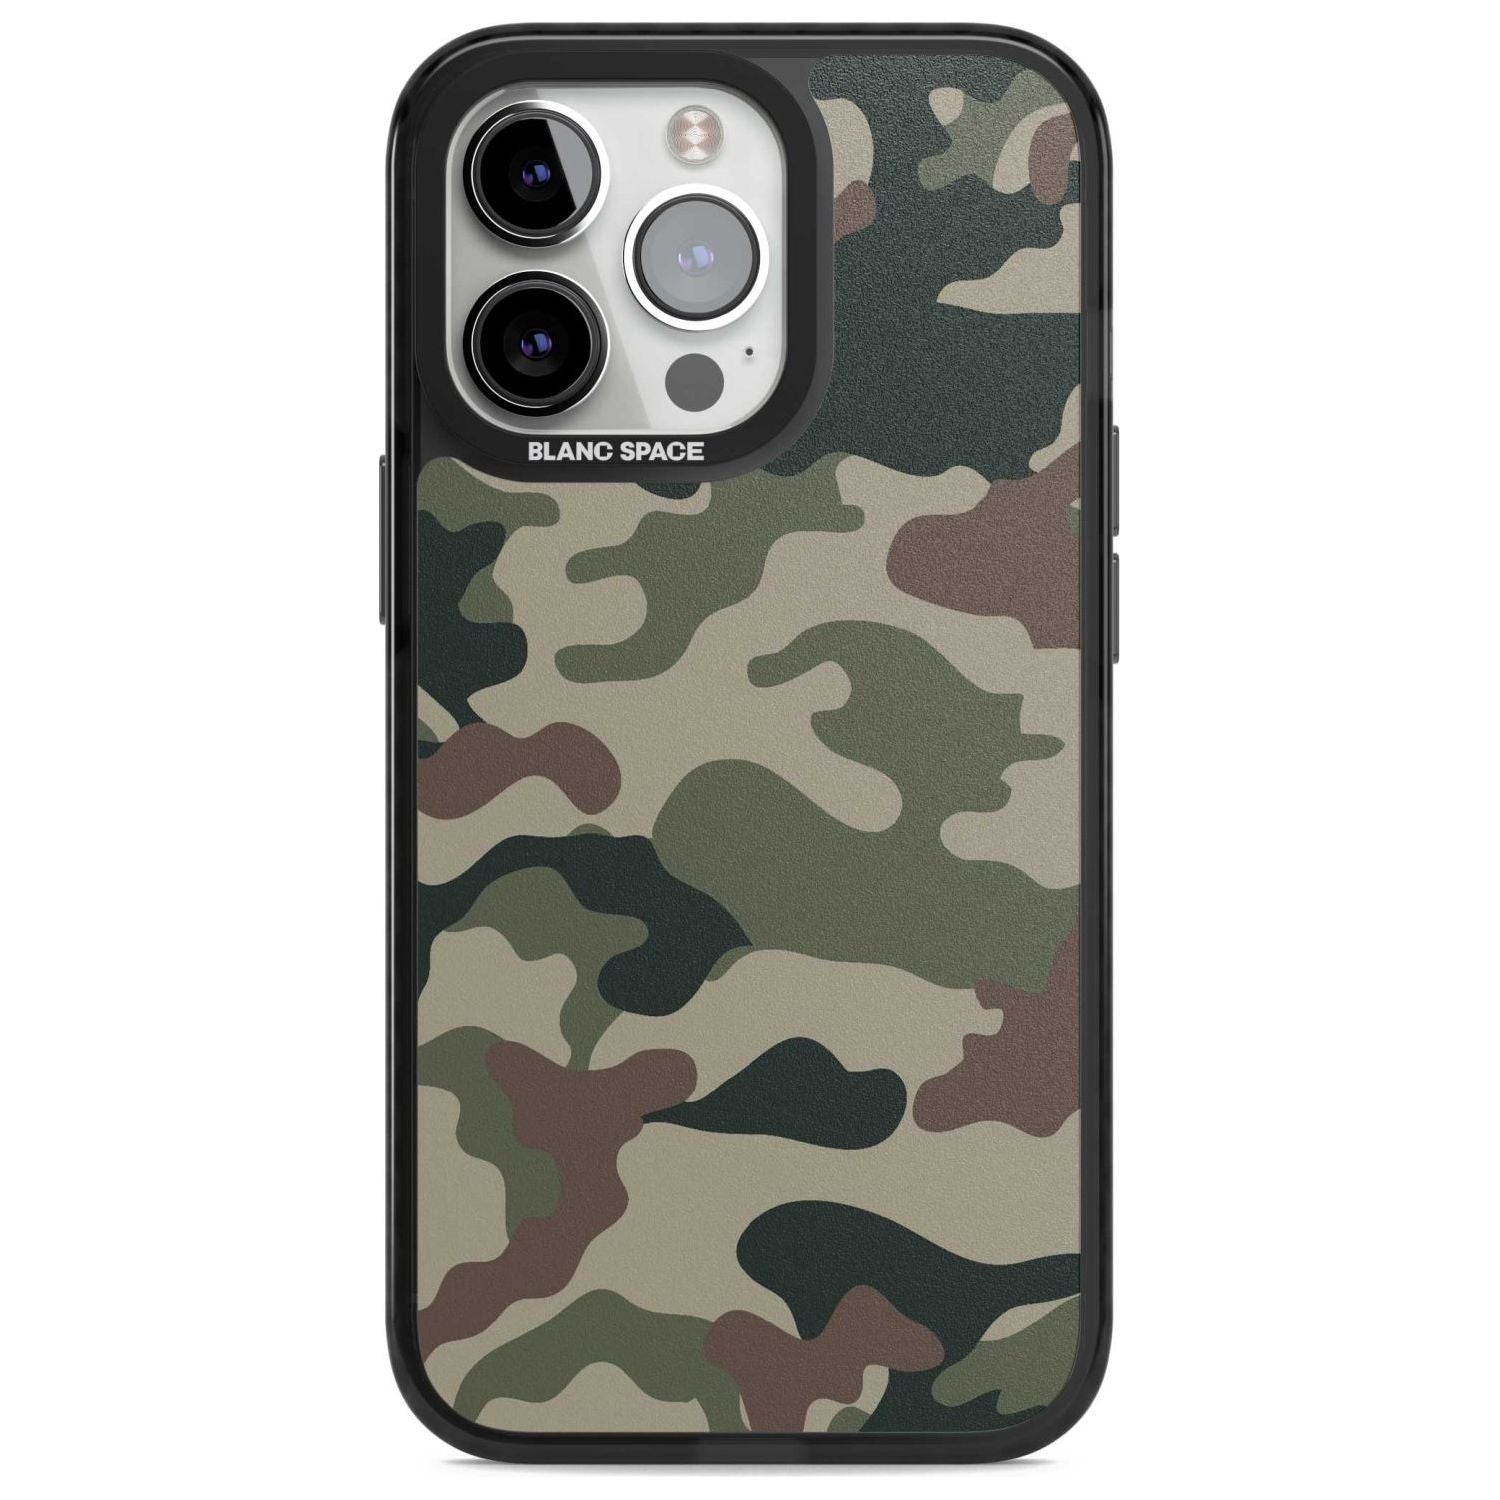 Green and Brown Camo Phone Case iPhone 15 Pro Max / Magsafe Black Impact Case,iPhone 15 Pro / Magsafe Black Impact Case,iPhone 14 Pro Max / Magsafe Black Impact Case,iPhone 14 Pro / Magsafe Black Impact Case,iPhone 13 Pro / Magsafe Black Impact Case Blanc Space